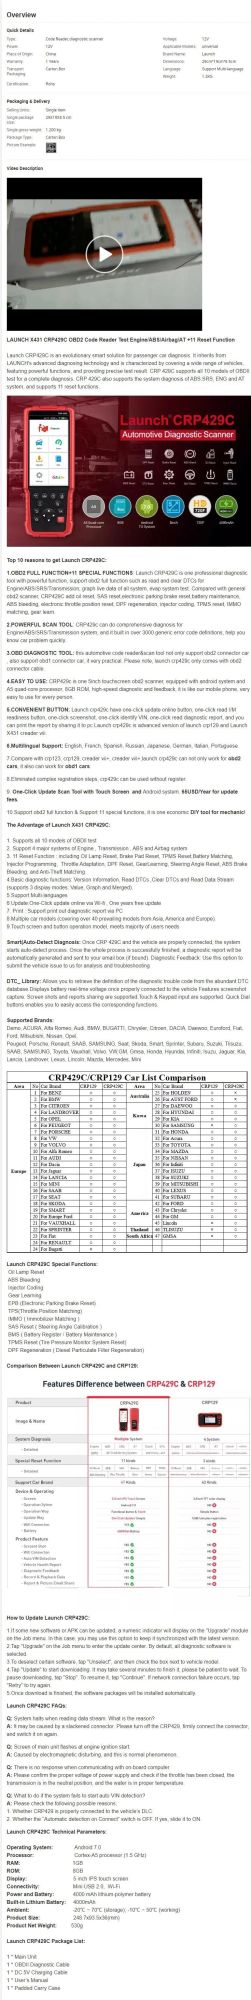 Crp Code Reading Card Contains 11 Special Function